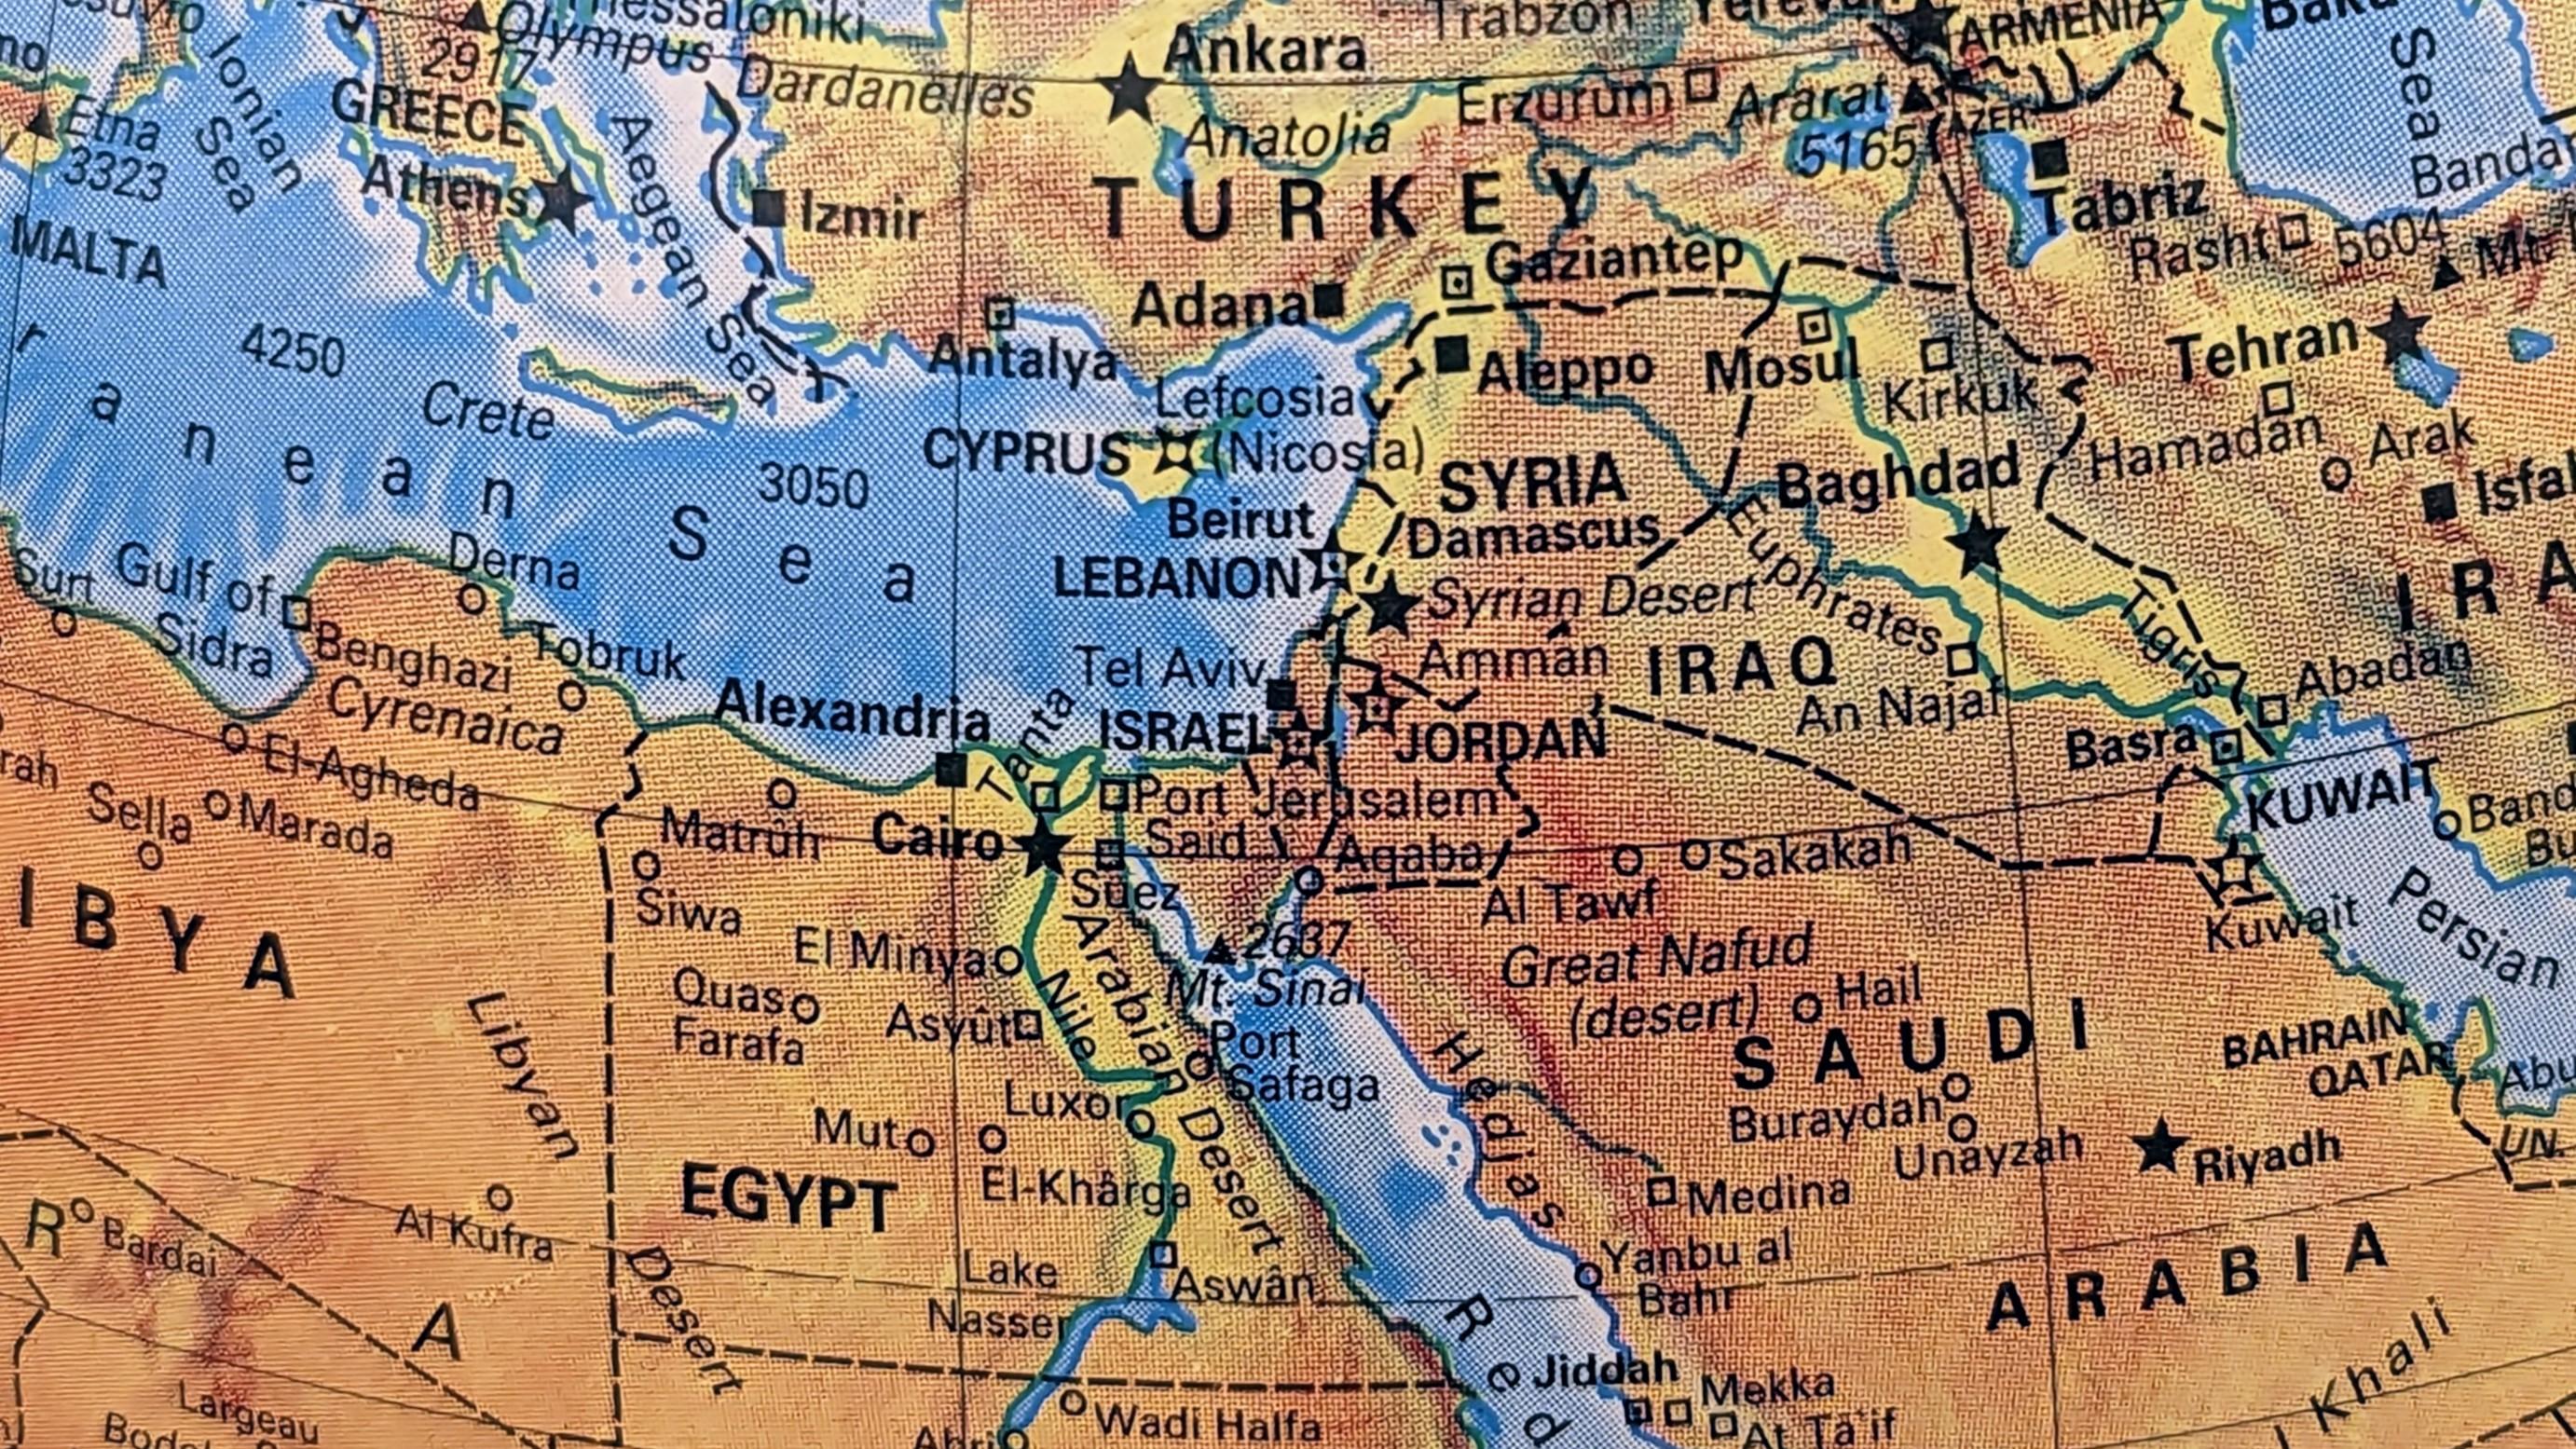 A photograph of the Middle East on an old globe.